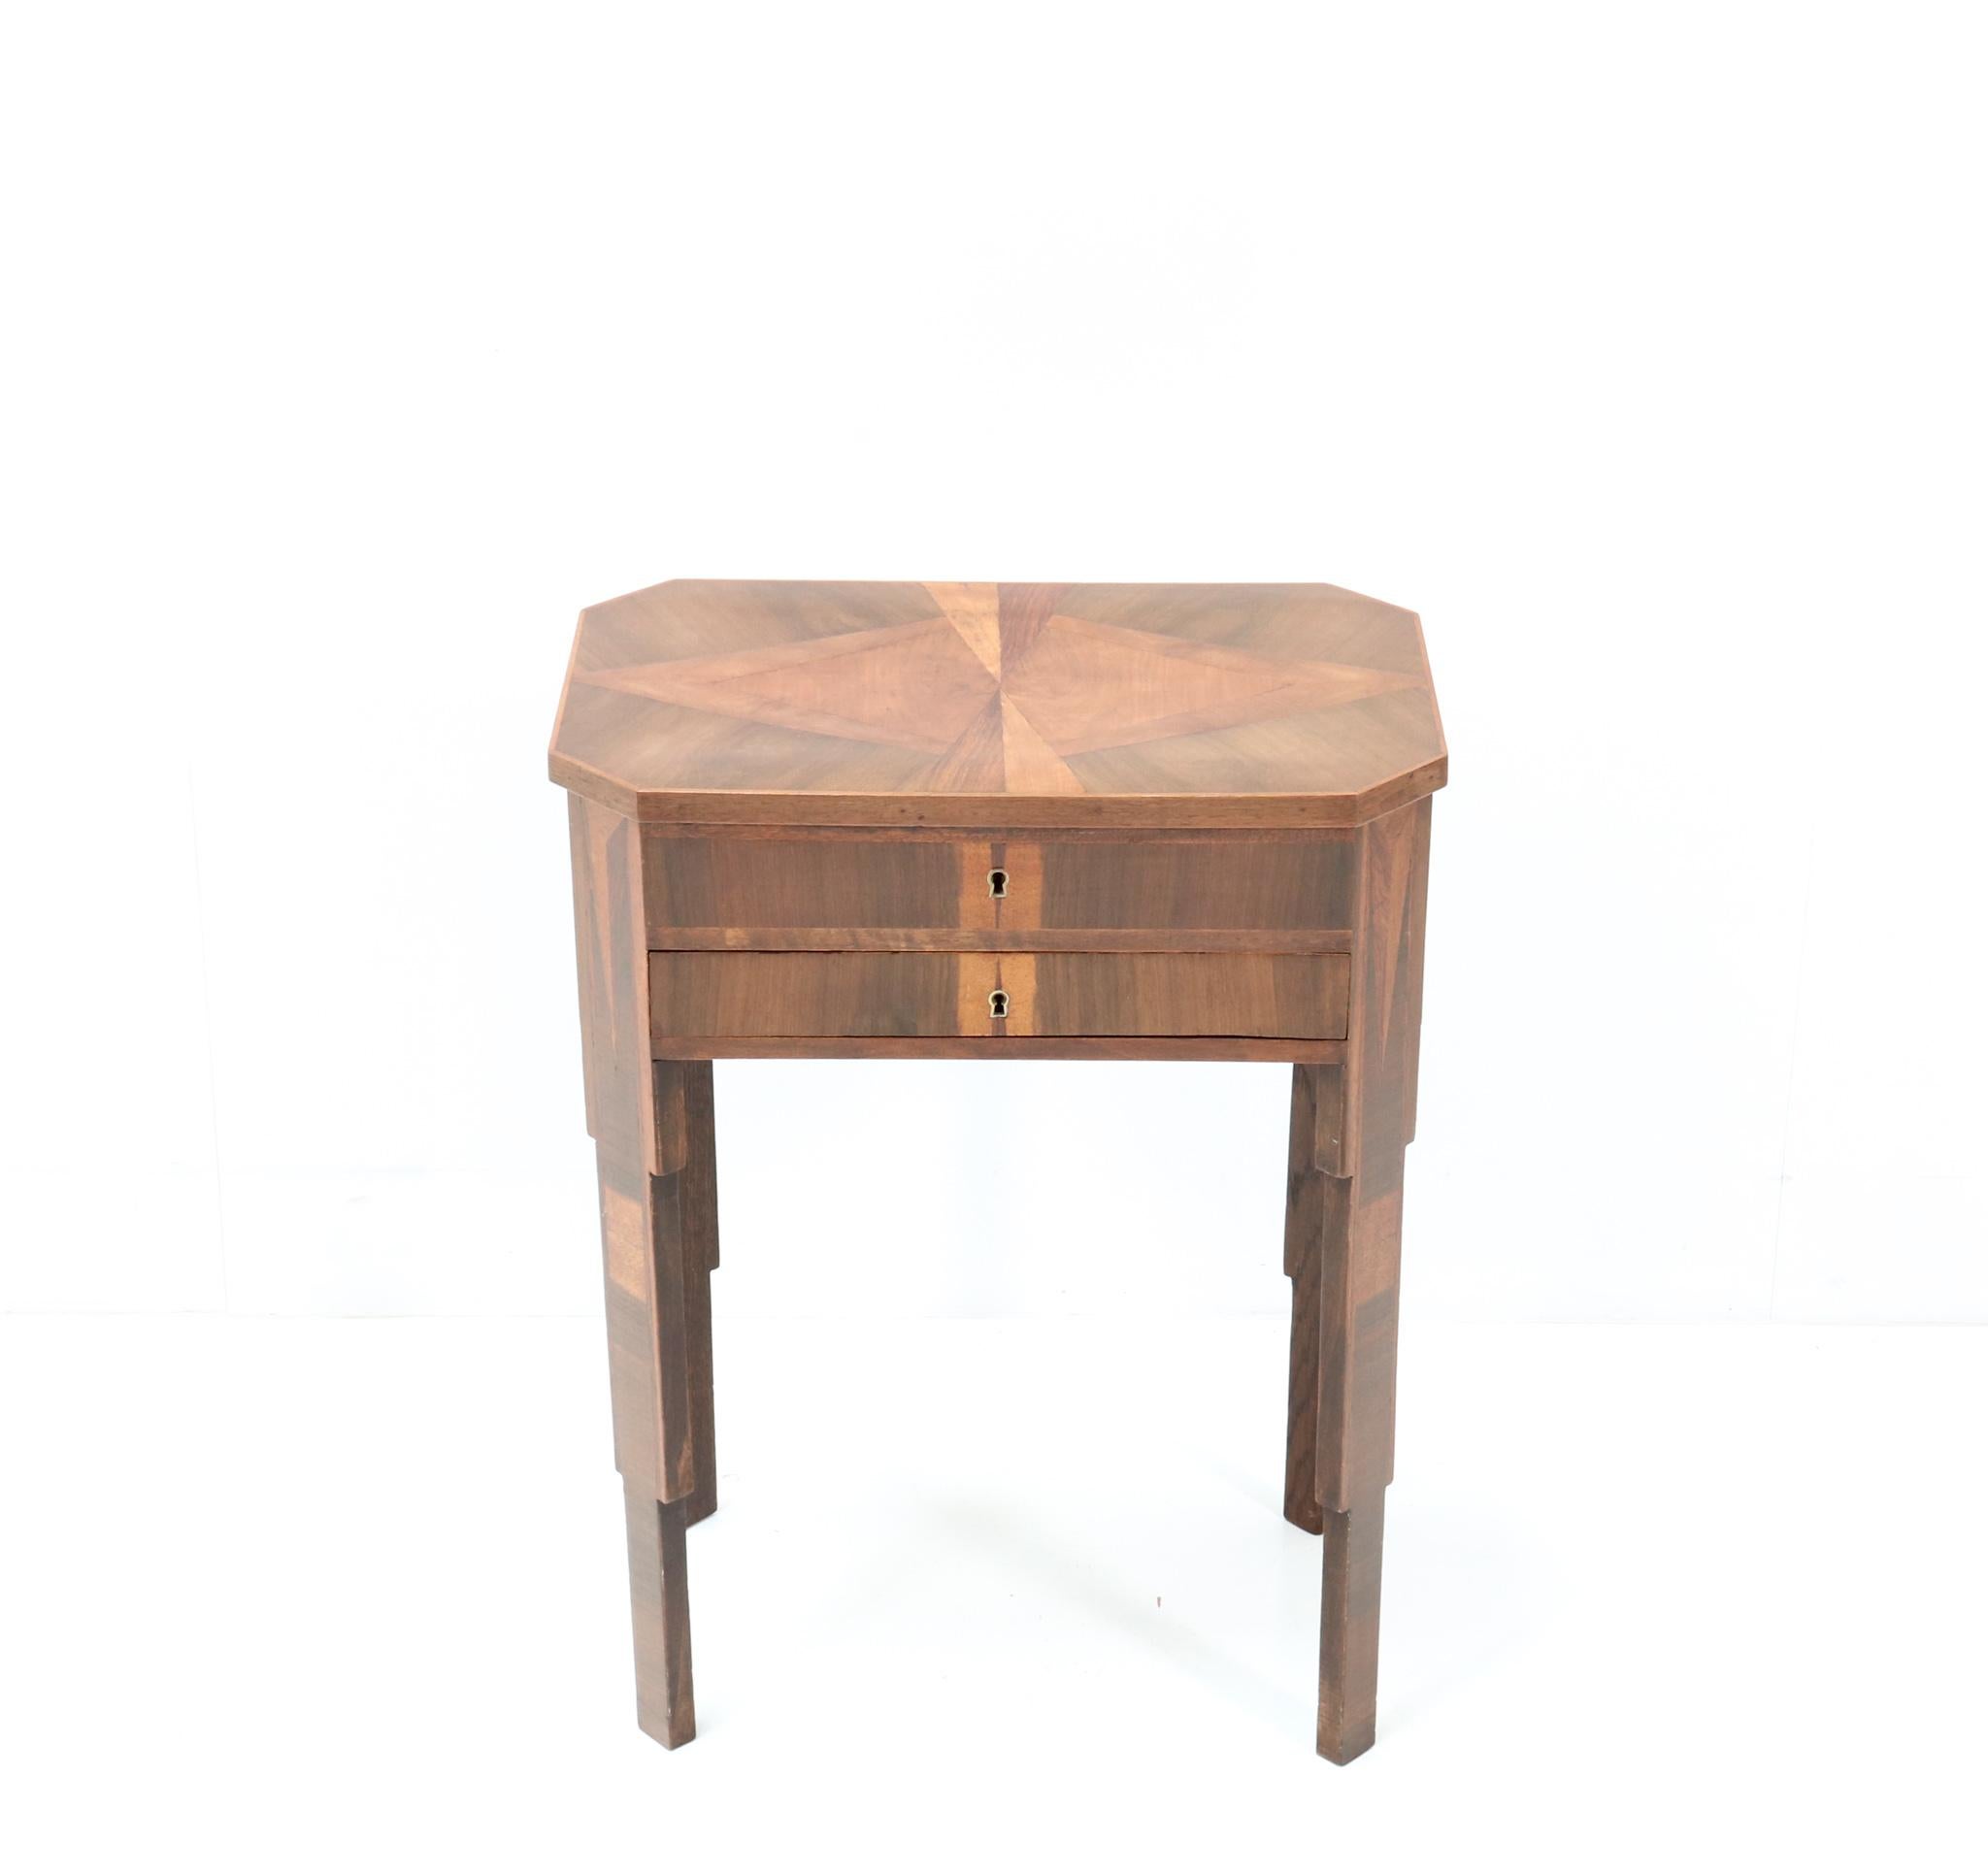 Magnificent and rare Art Deco sewing table.
Striking French design of the 1930s.
Walnut veneered wooden frame with original inlay of satinwood veneer.
Lock and key are in good working order.
This wonderful Art Deco sewing table is in very good